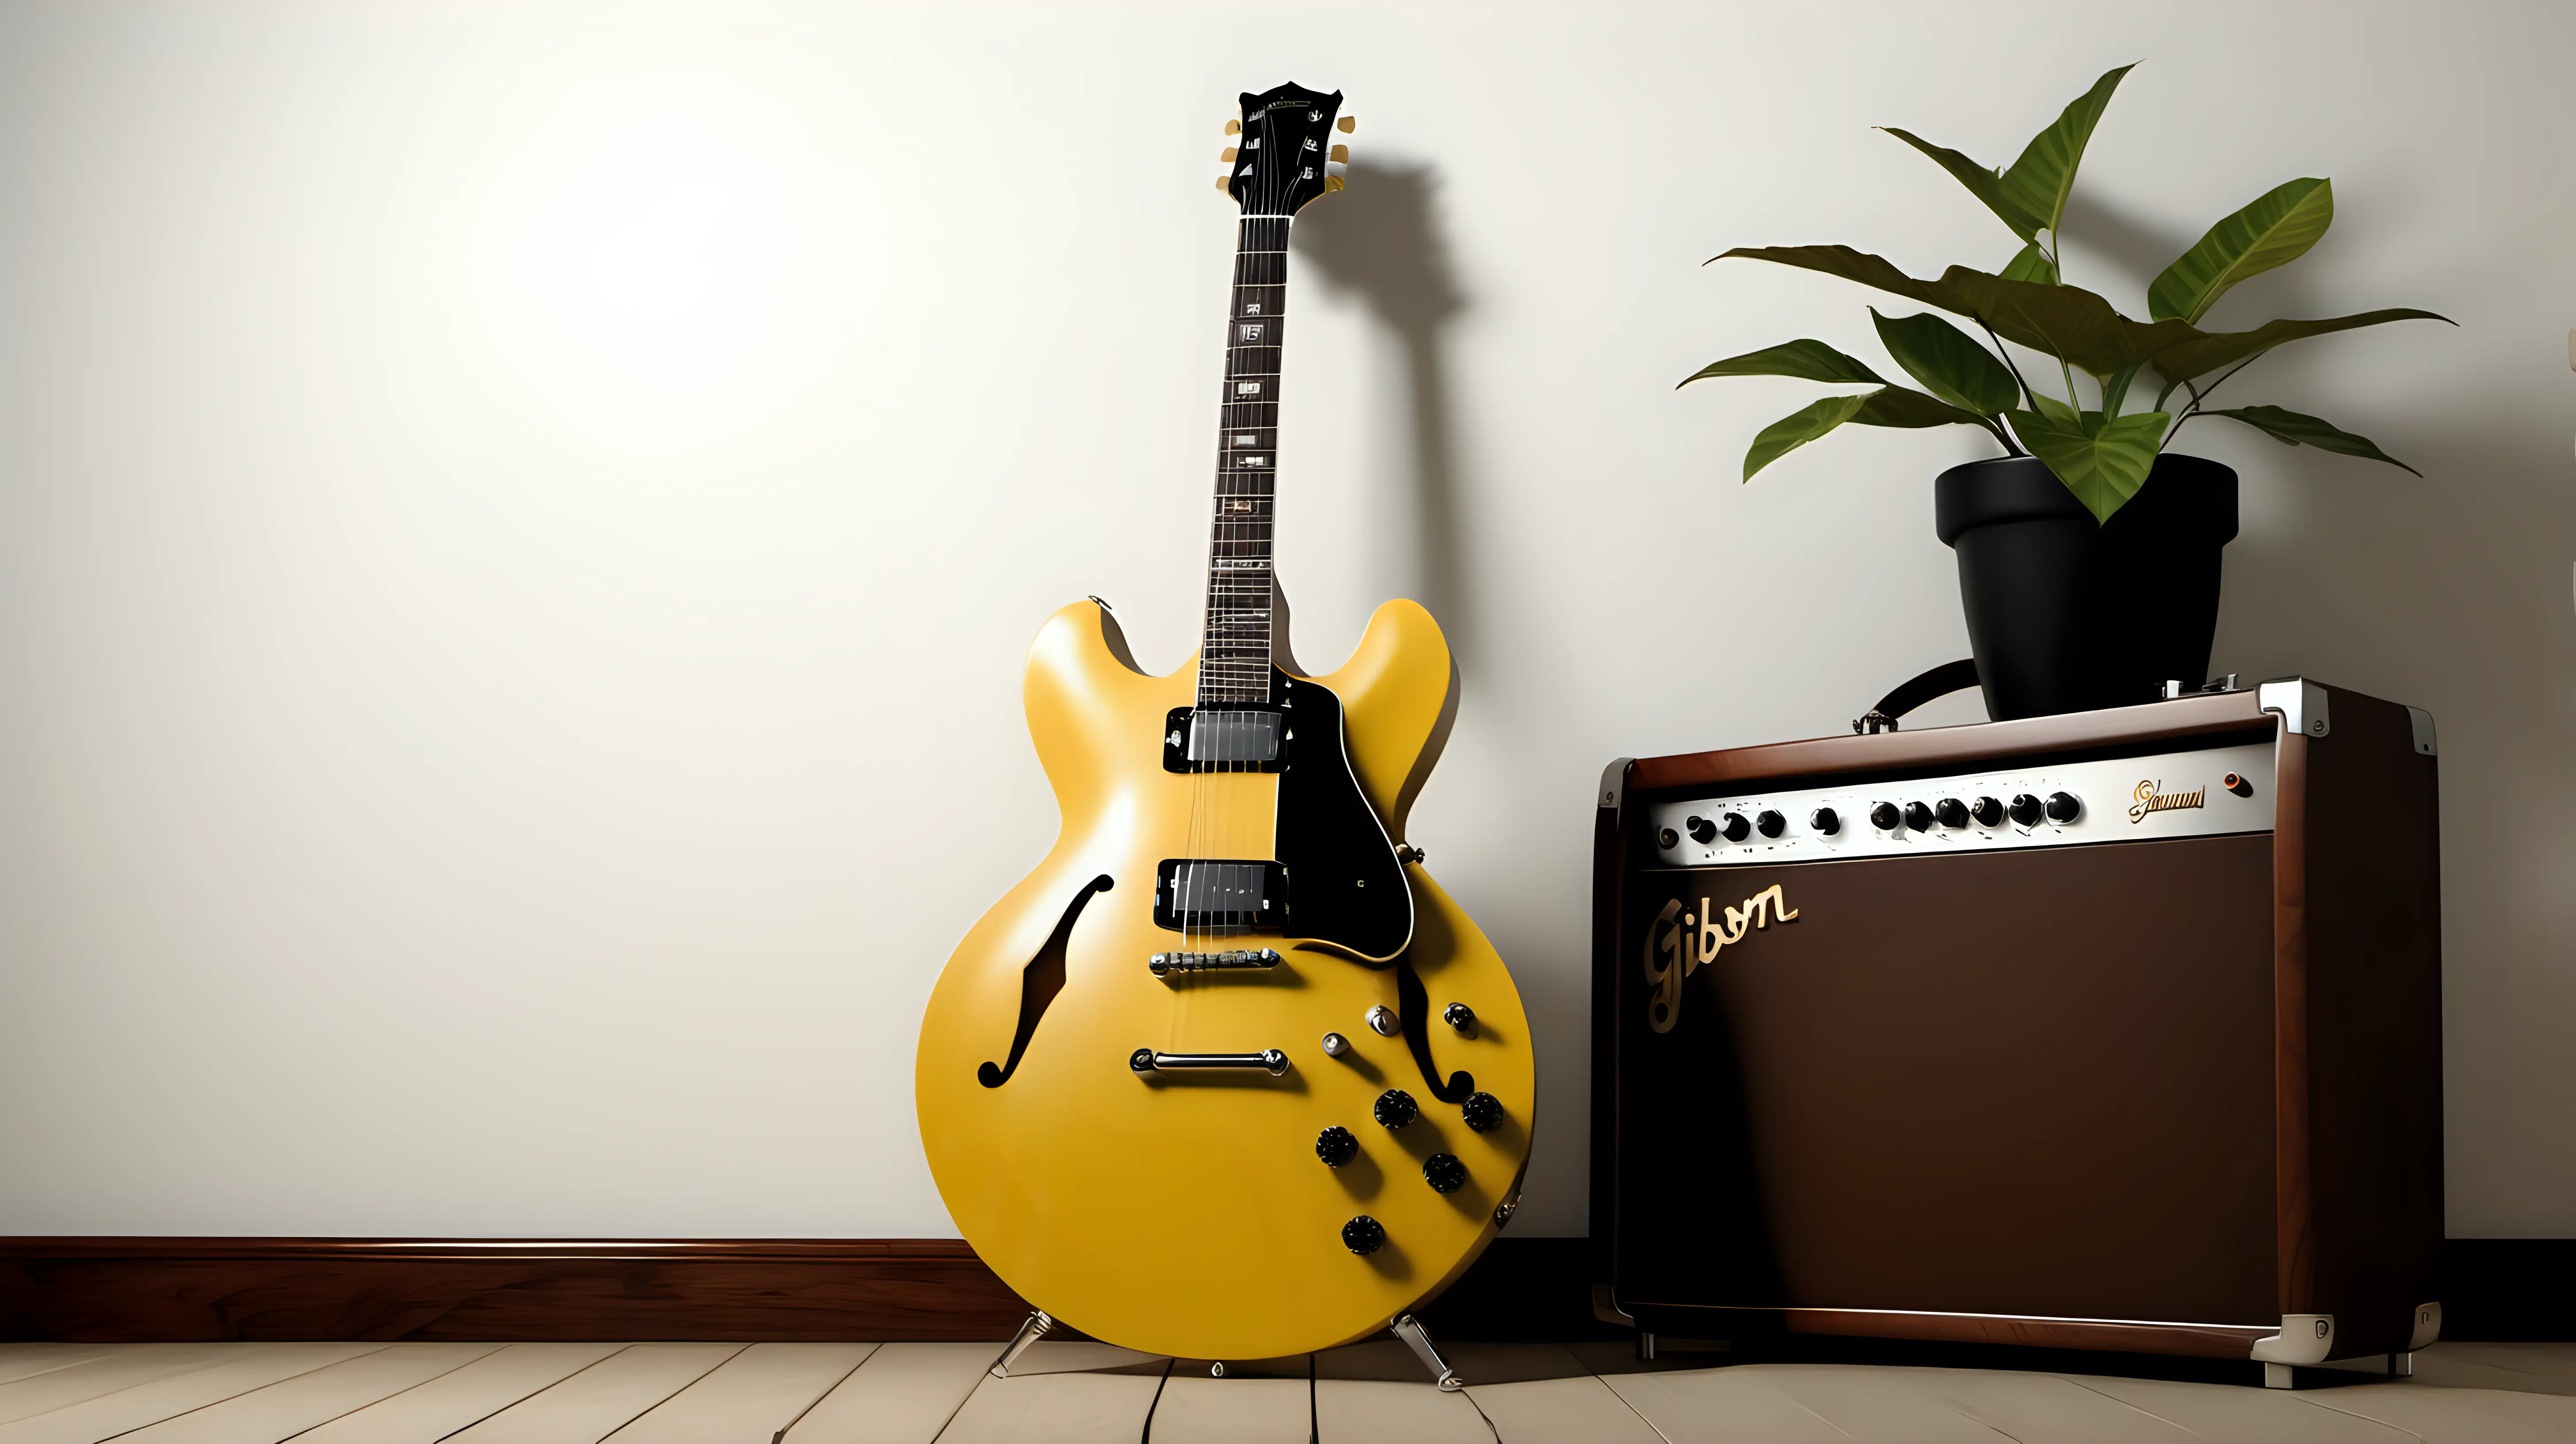 gibson es-335 light yellow guitar with fine details and very realistic, against a wooden white wall, one amplifier in brown color, minimal decoration with a plant